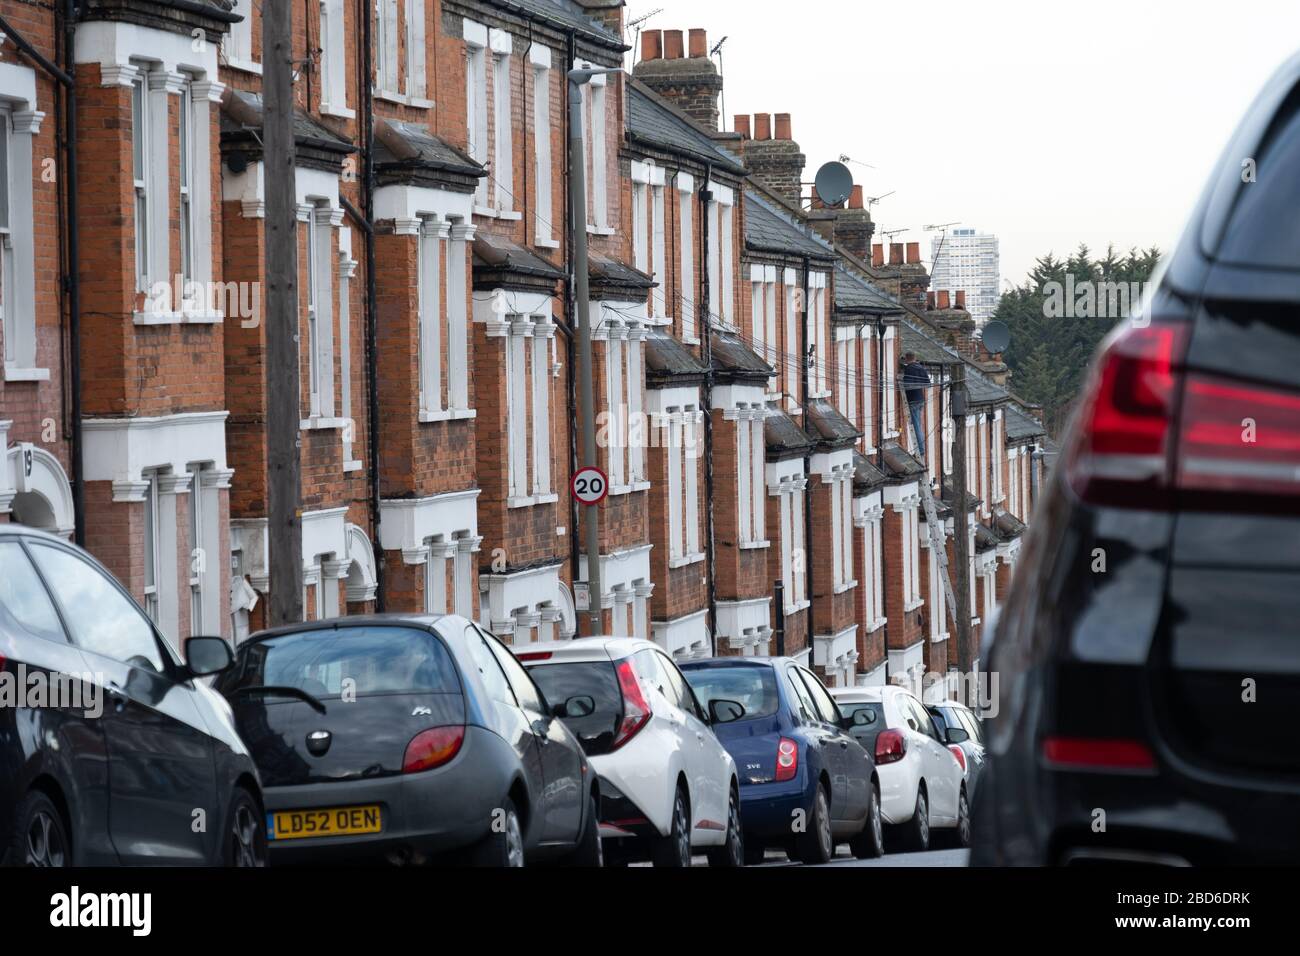 A street of typical British houses with on street parking Stock Photo